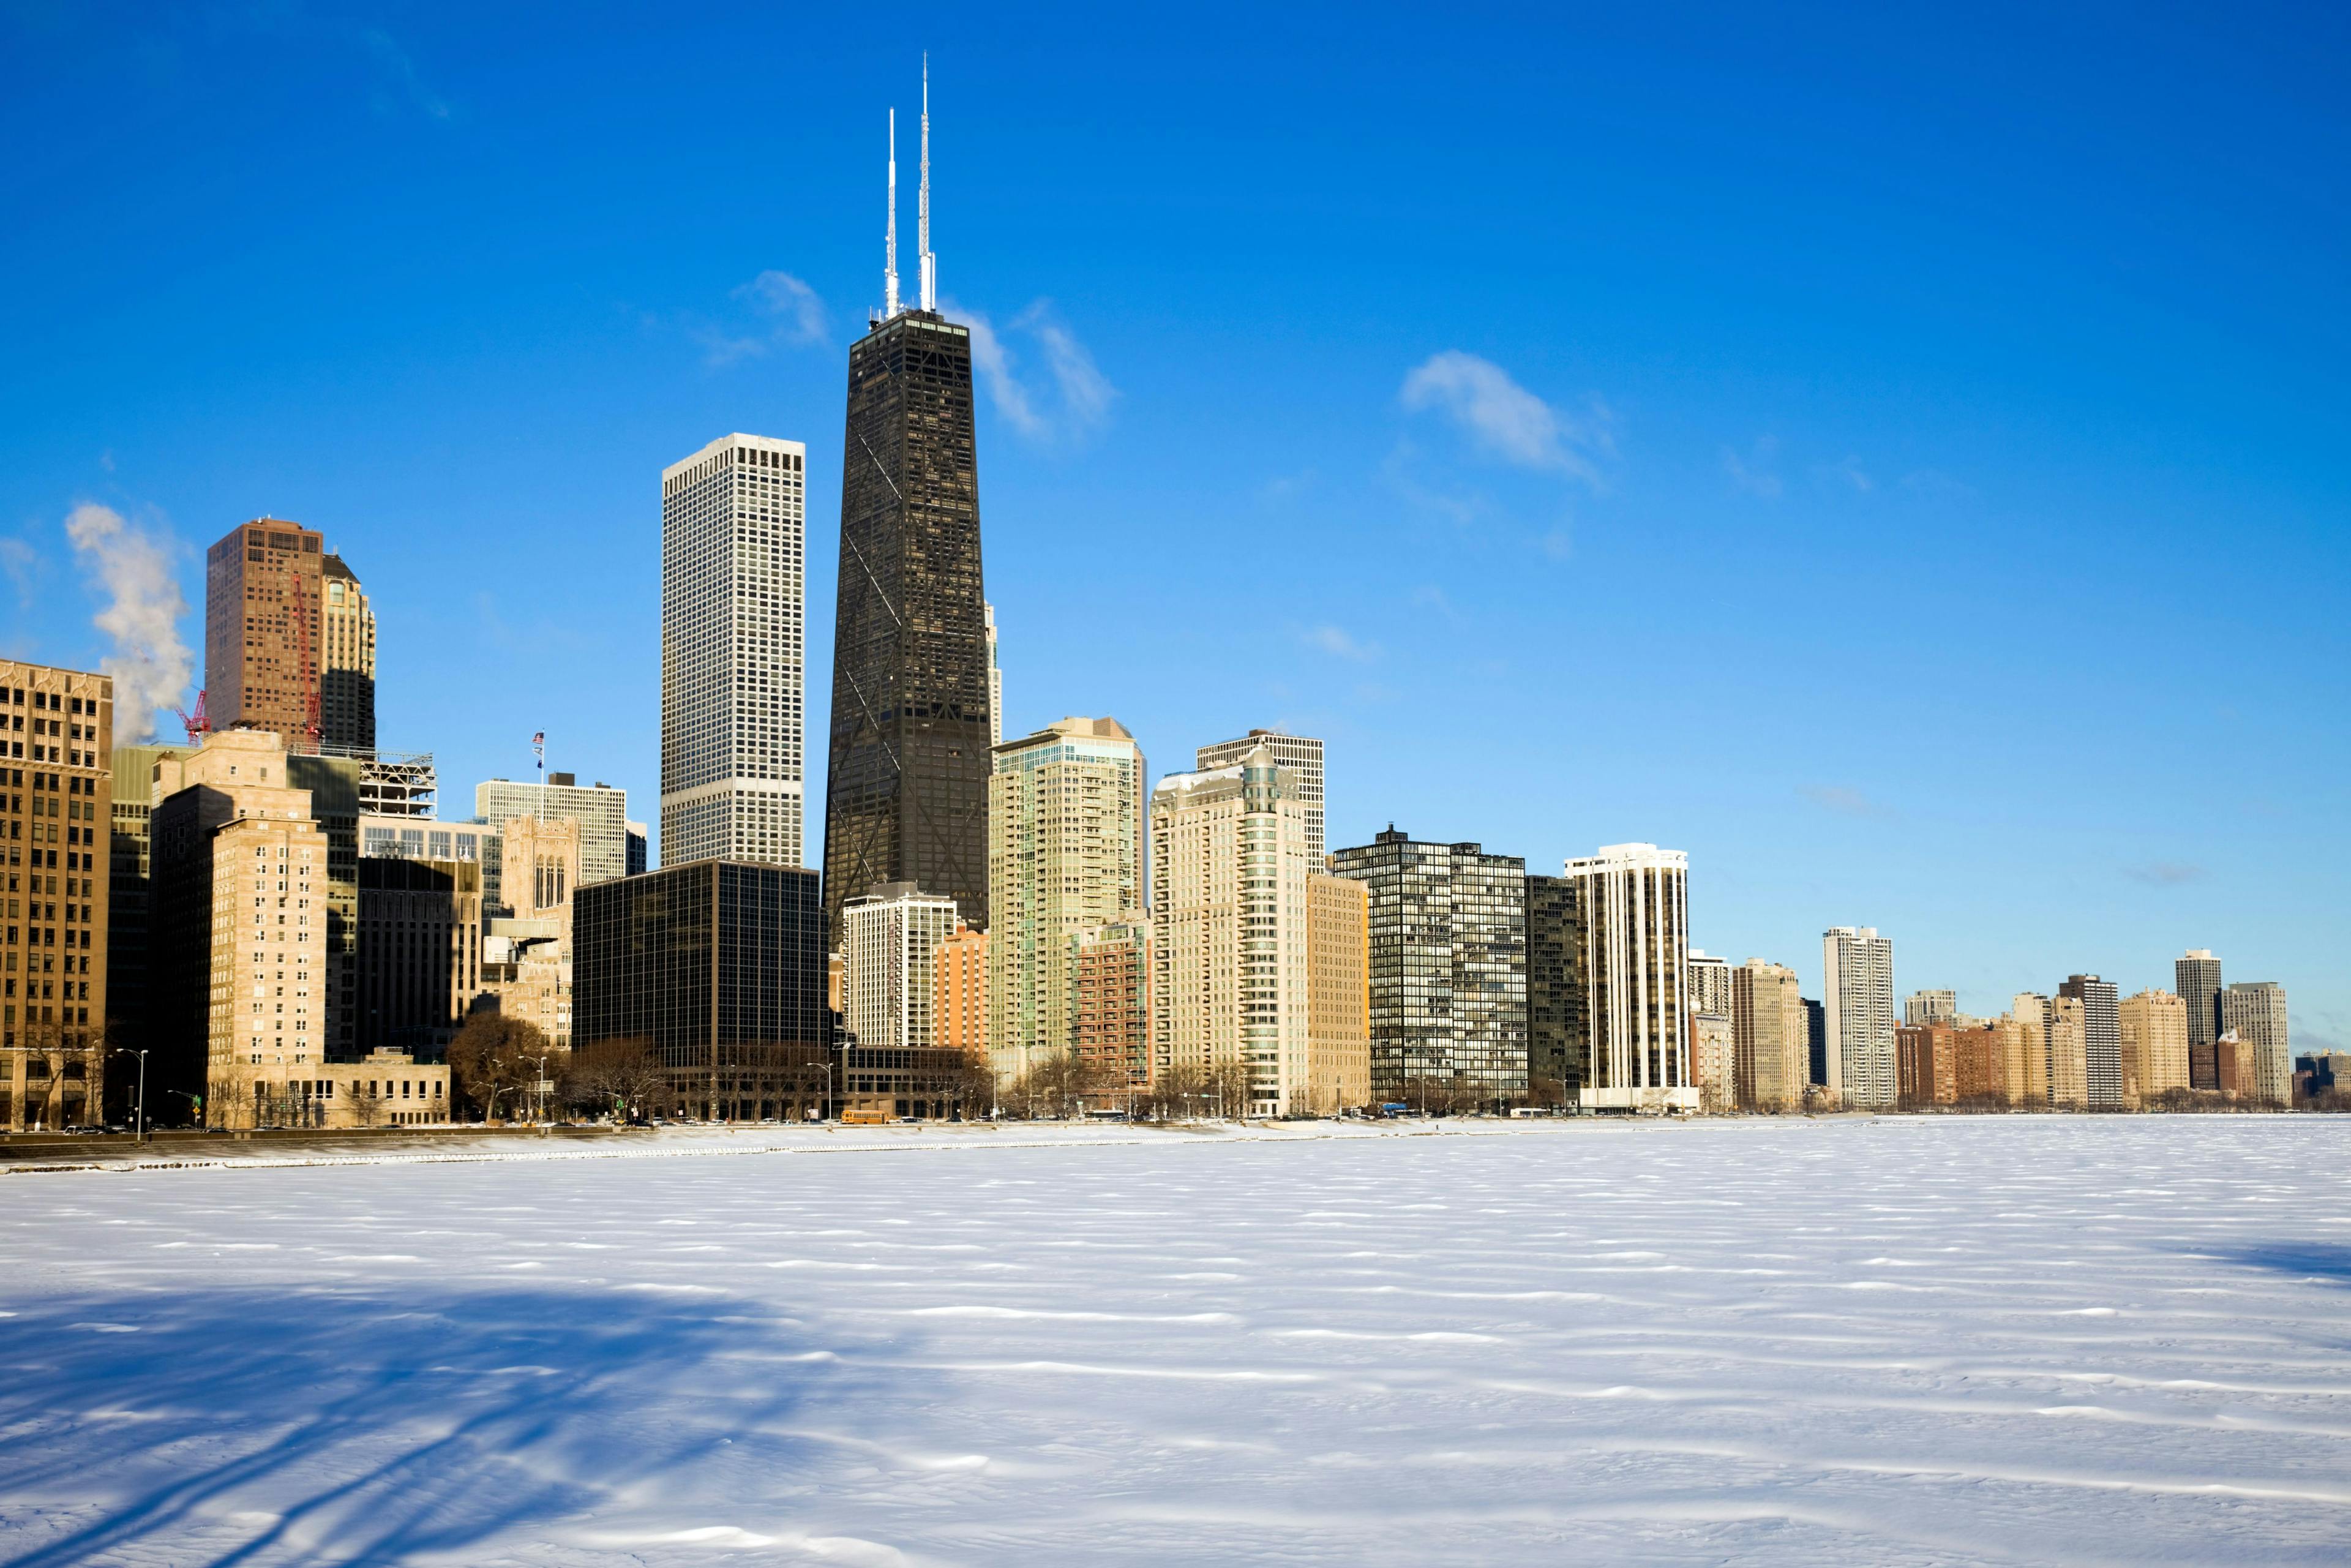 MidWinter Returns to Chicago—Day 1 Recap of 2022 Chicago MidWinter